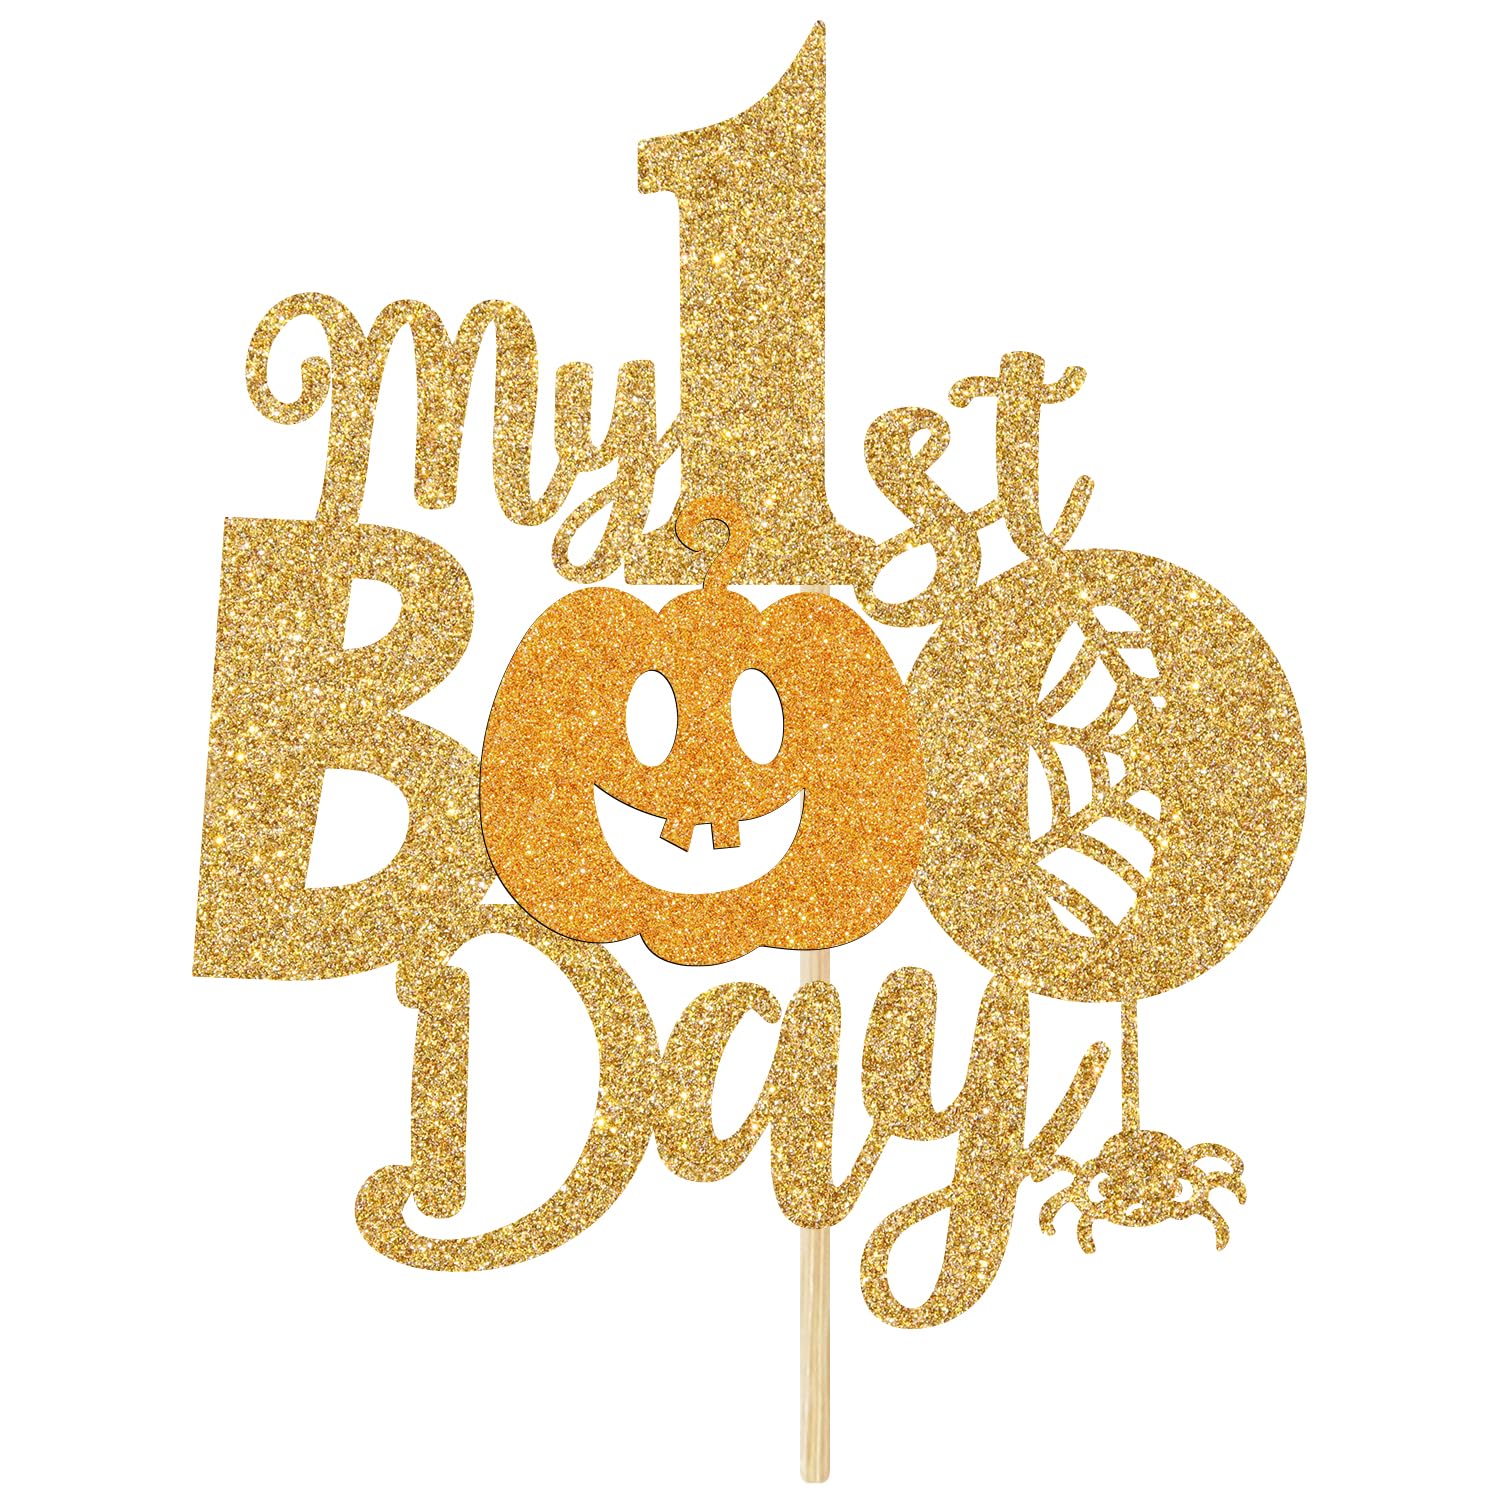 My 1st Boo Day Cake Topper - Halloween Happy Birthday Cake Decor for Baby's First Birthday - Fall Theme Happy 1st Birthday/Baby Shower Party Decorations Supplies for Kids, Gold Glitter